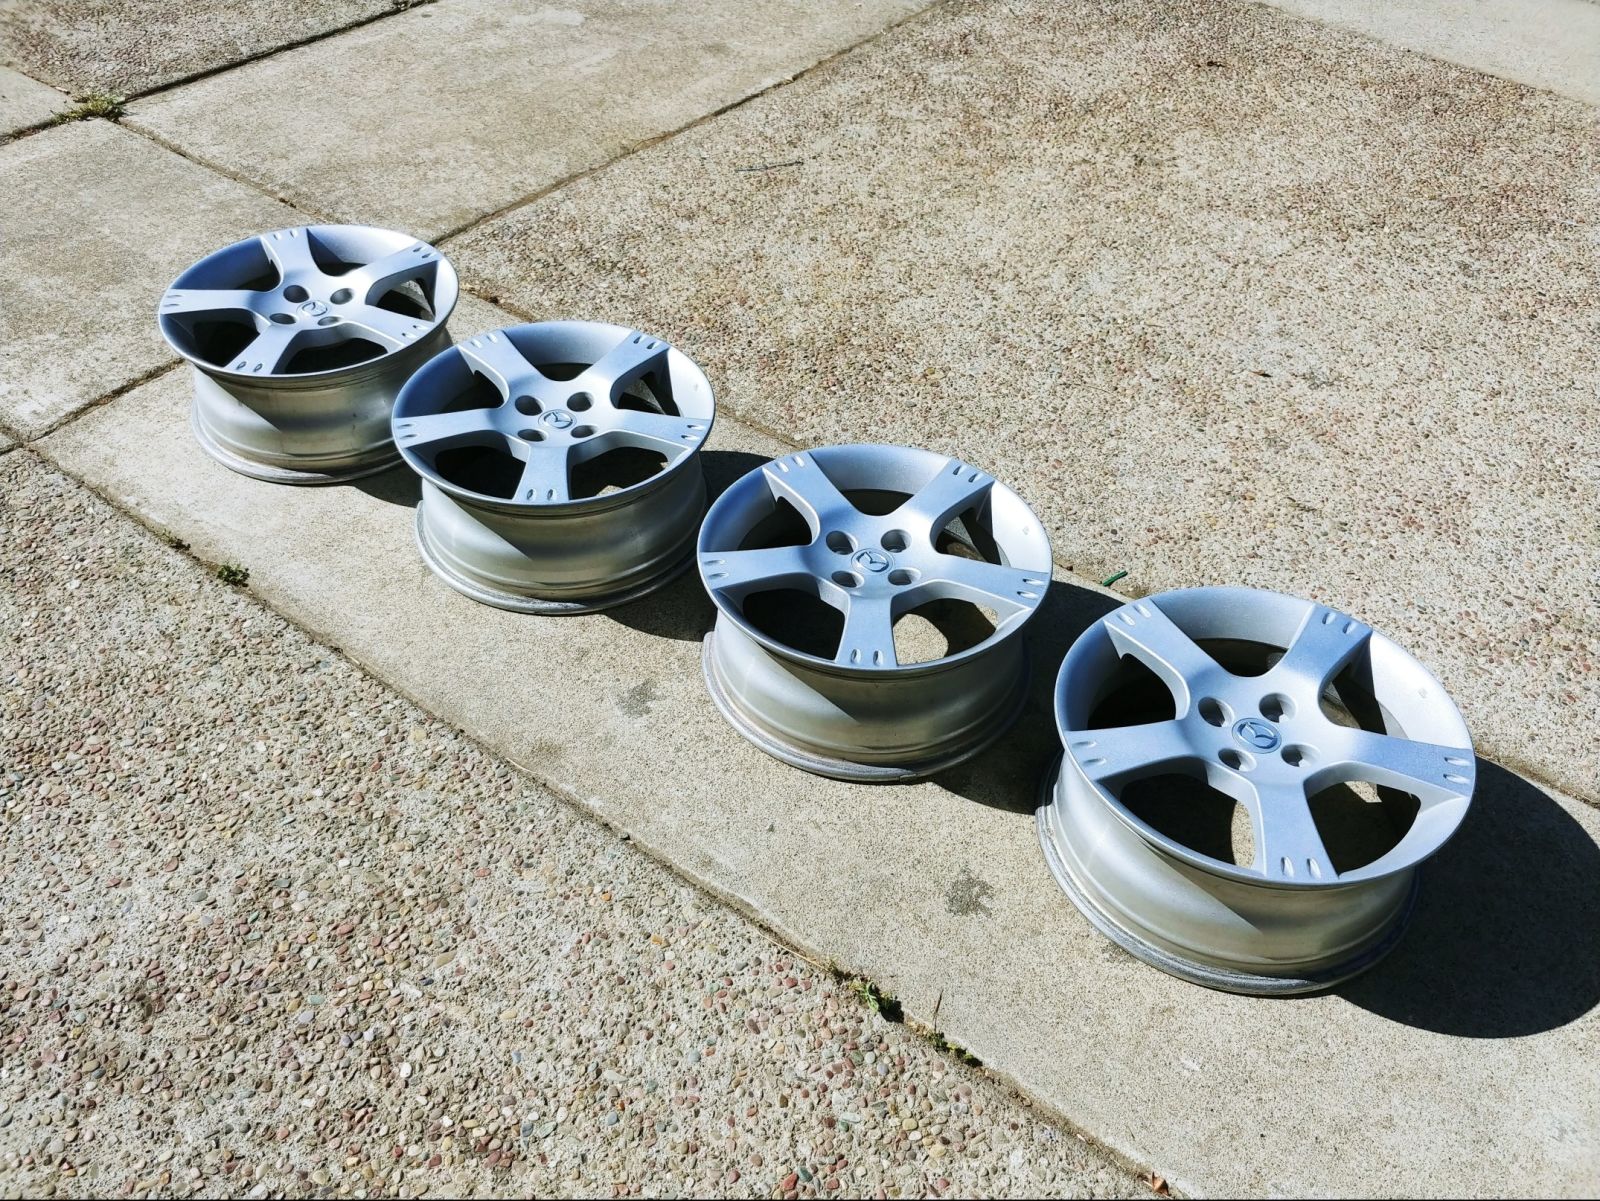 The finished wheels, painted and color sanded!